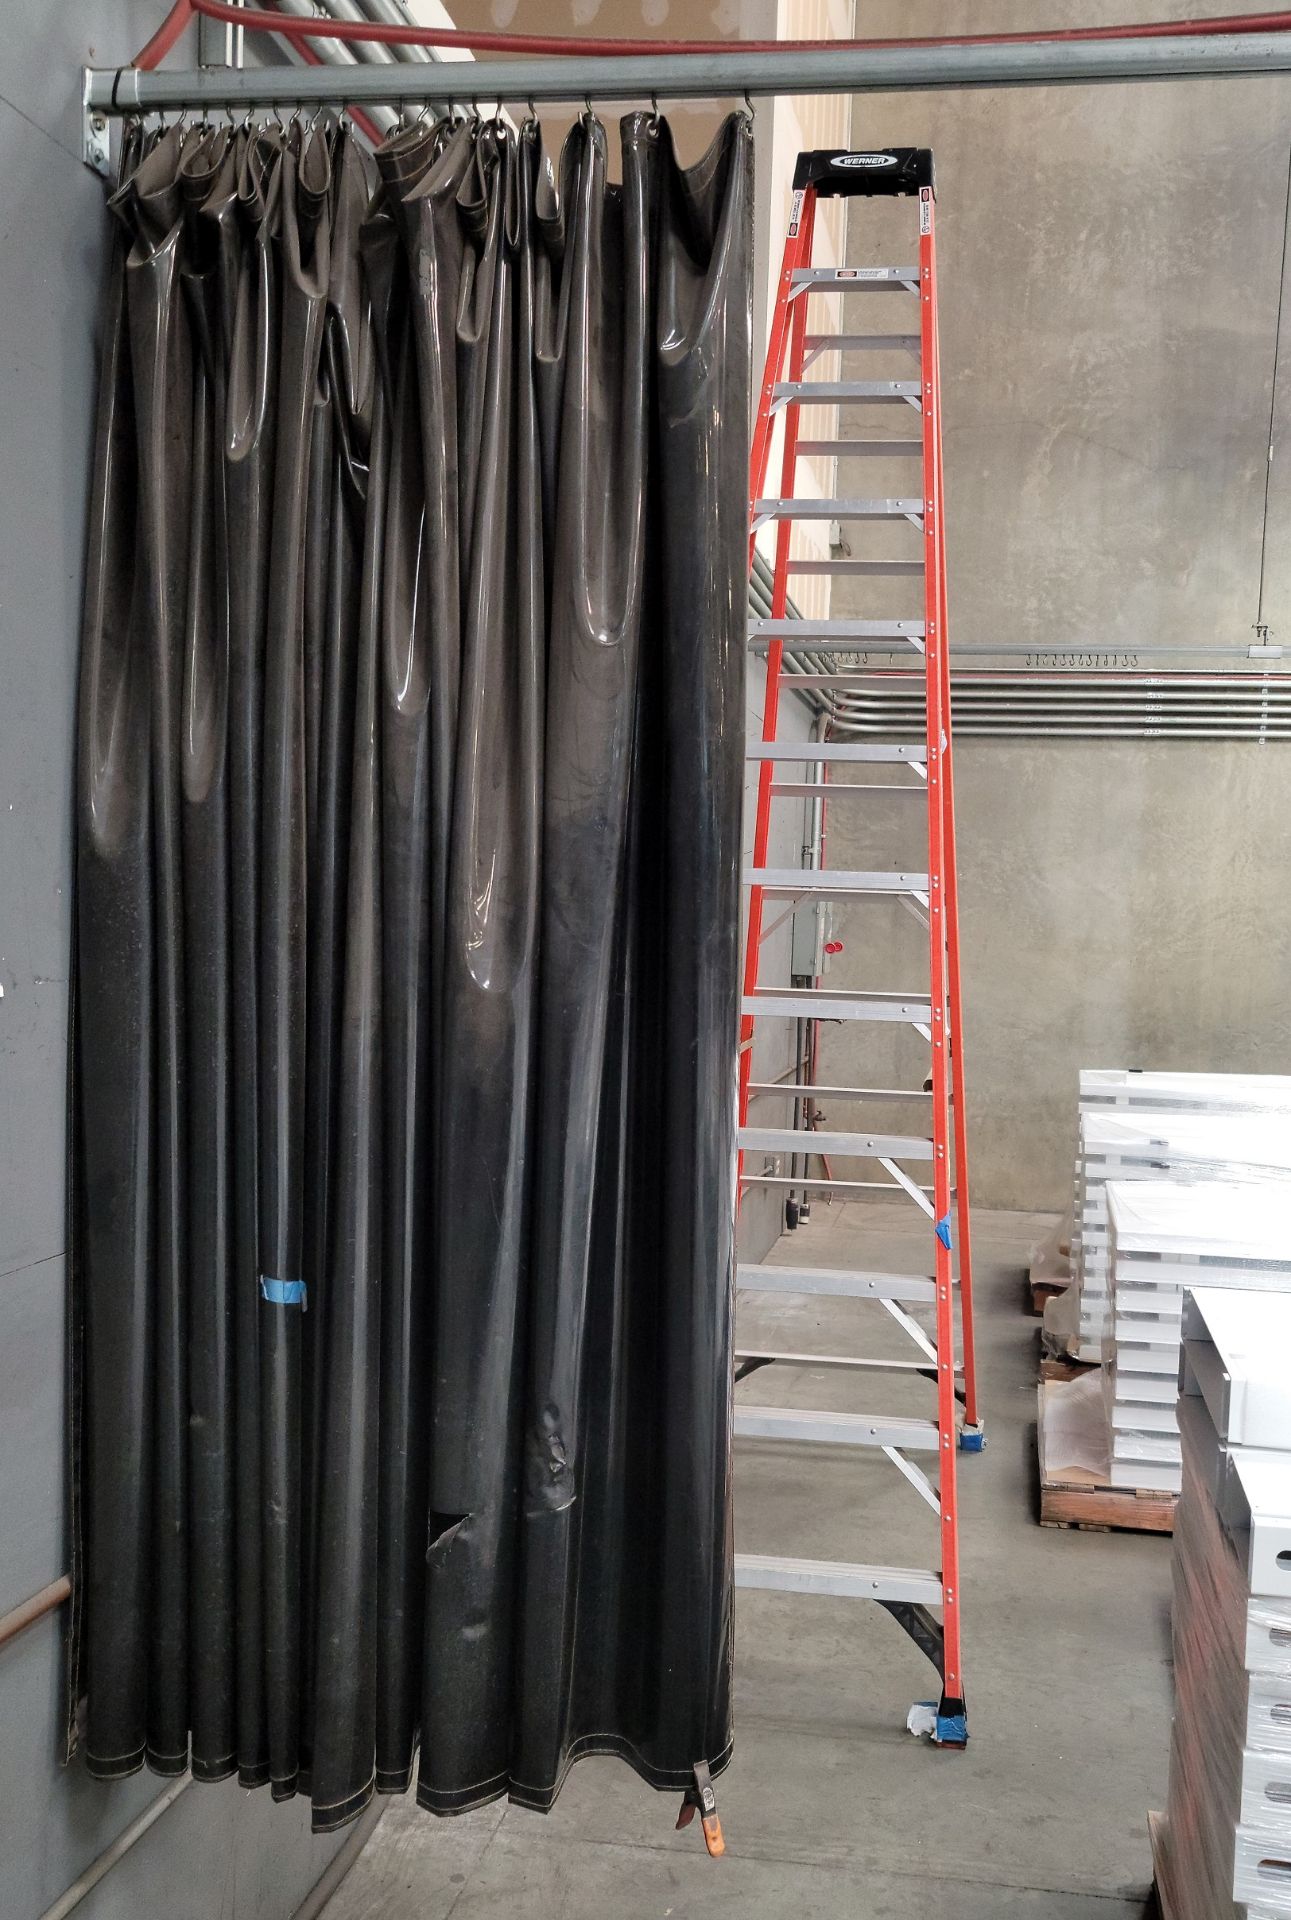 LOT - OVERHEAD WELDING CURTAIN SYSTEM, INCLUDES (2) SELF-RETRACTING AIR HOSE REELS, NO ELECTRICAL